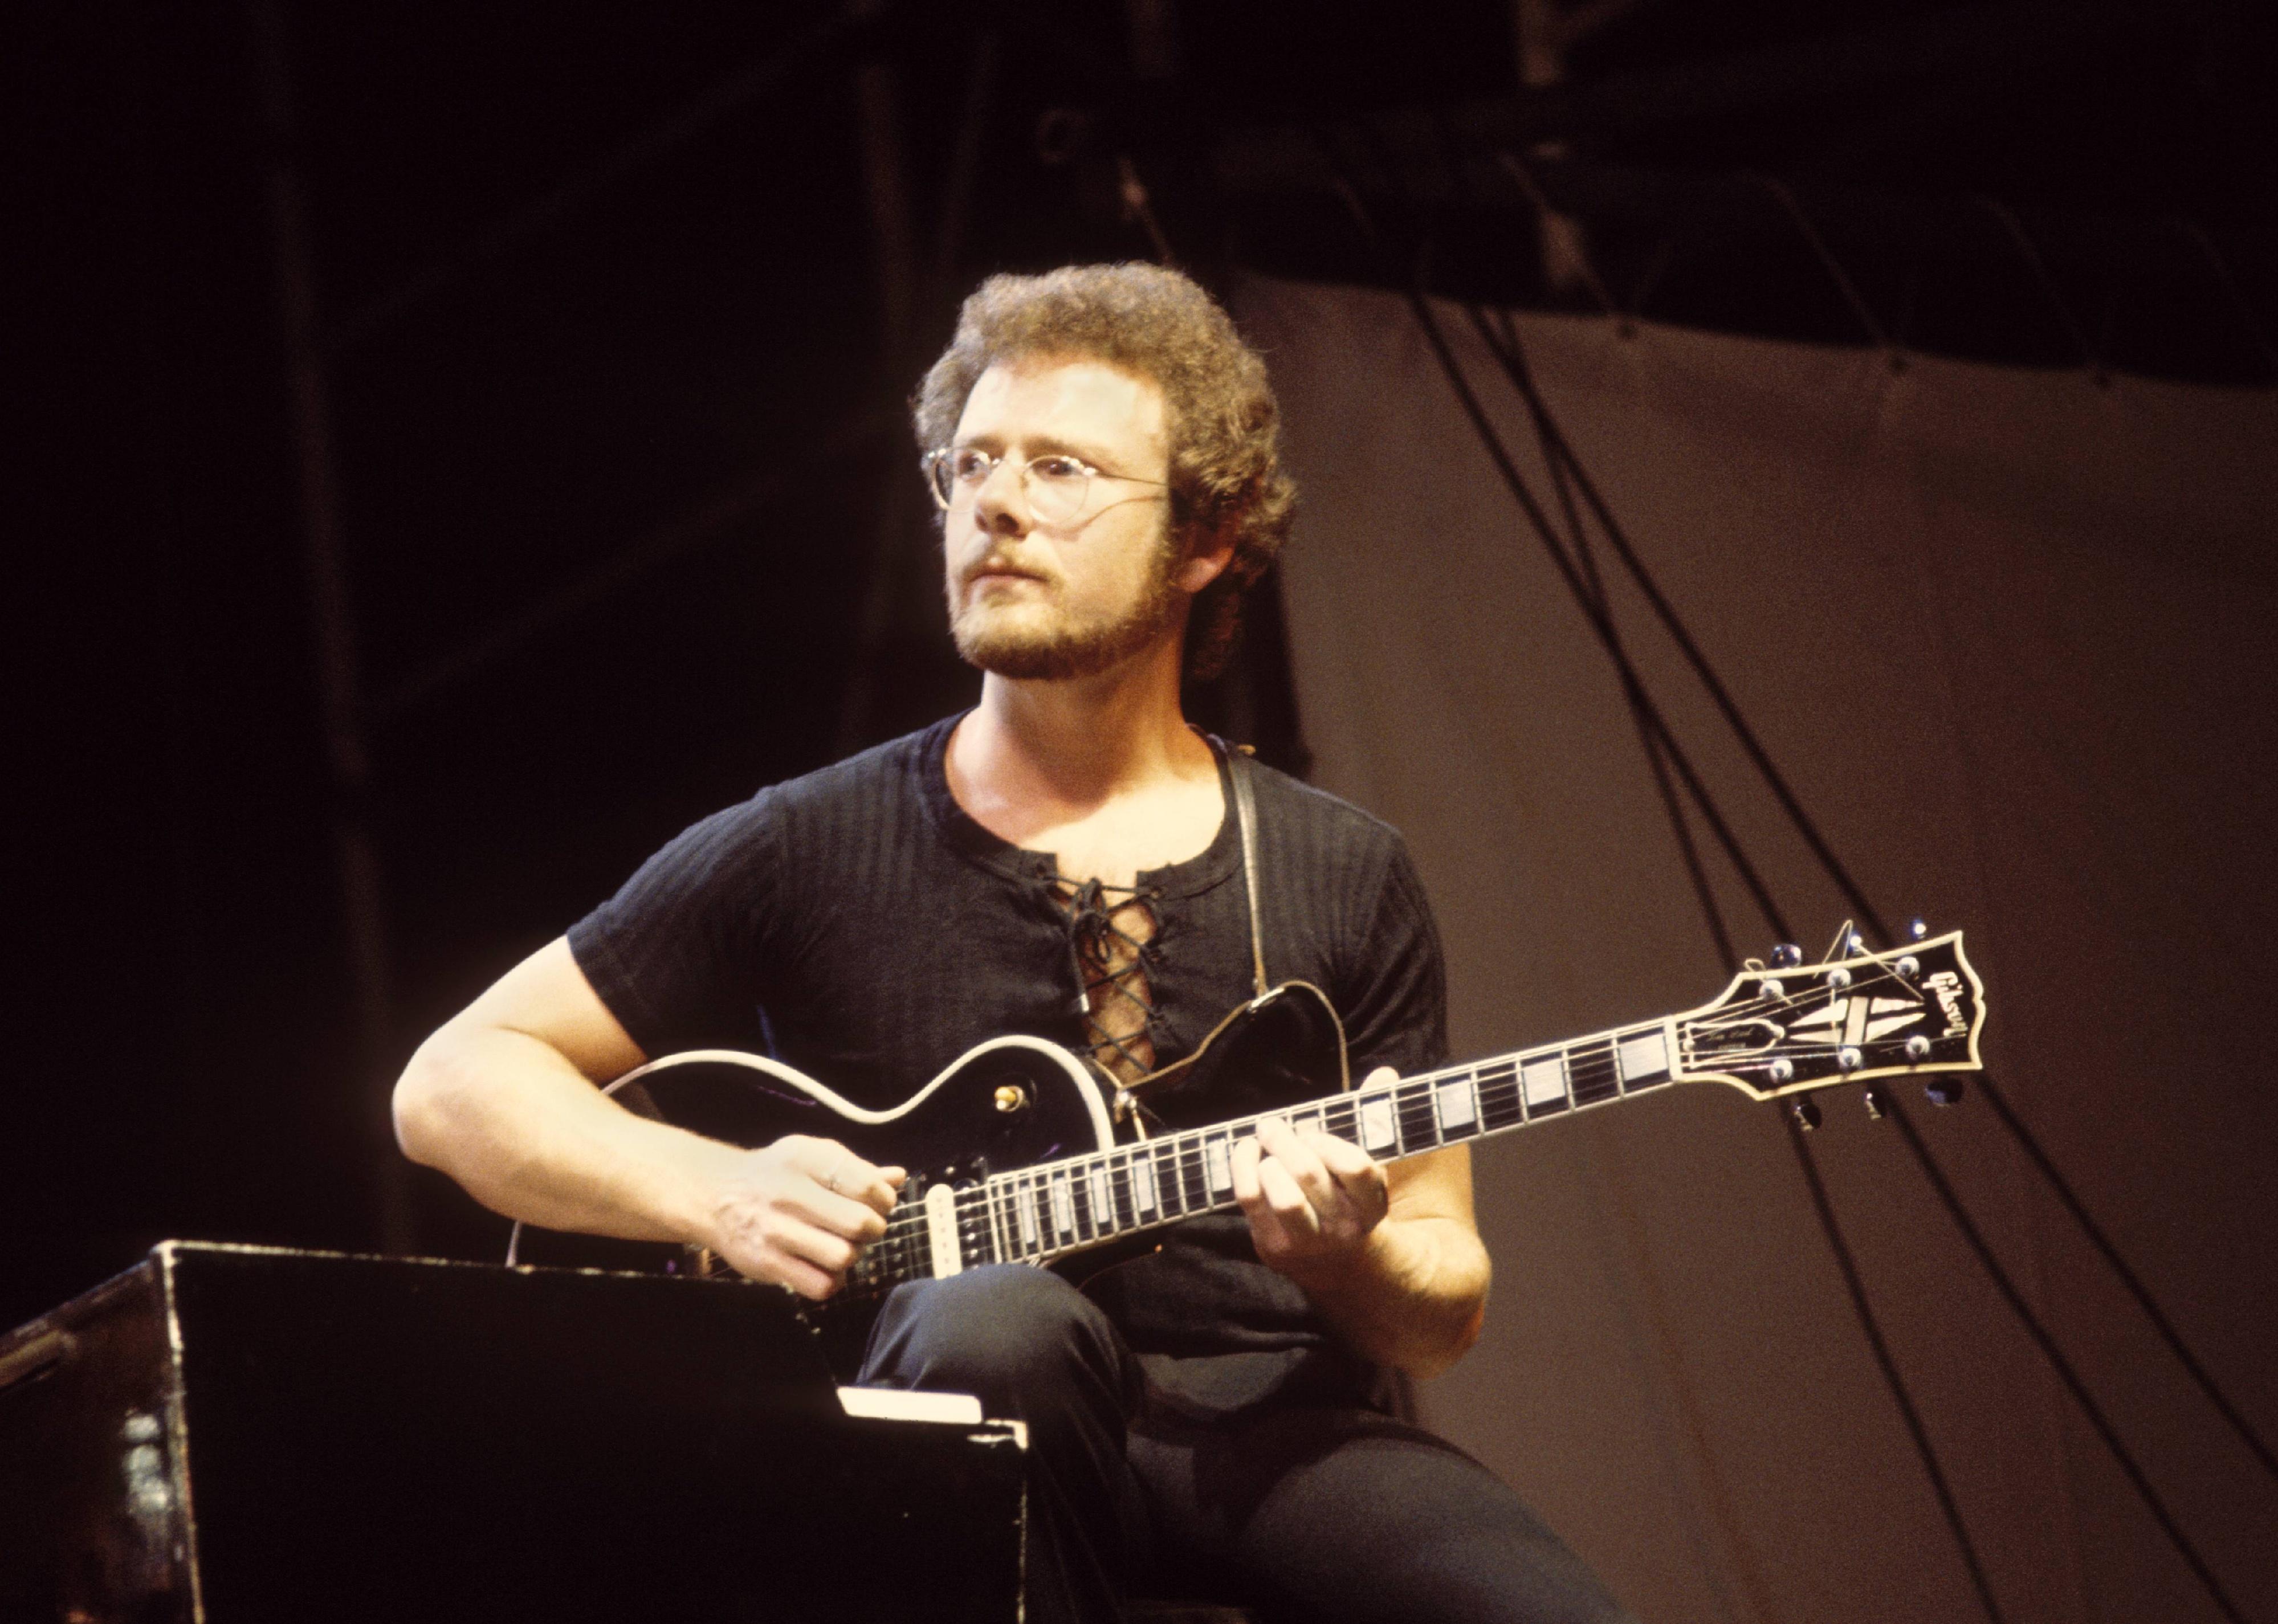 Robert Fripp playing Gibson Les Paul guitar live on stage.